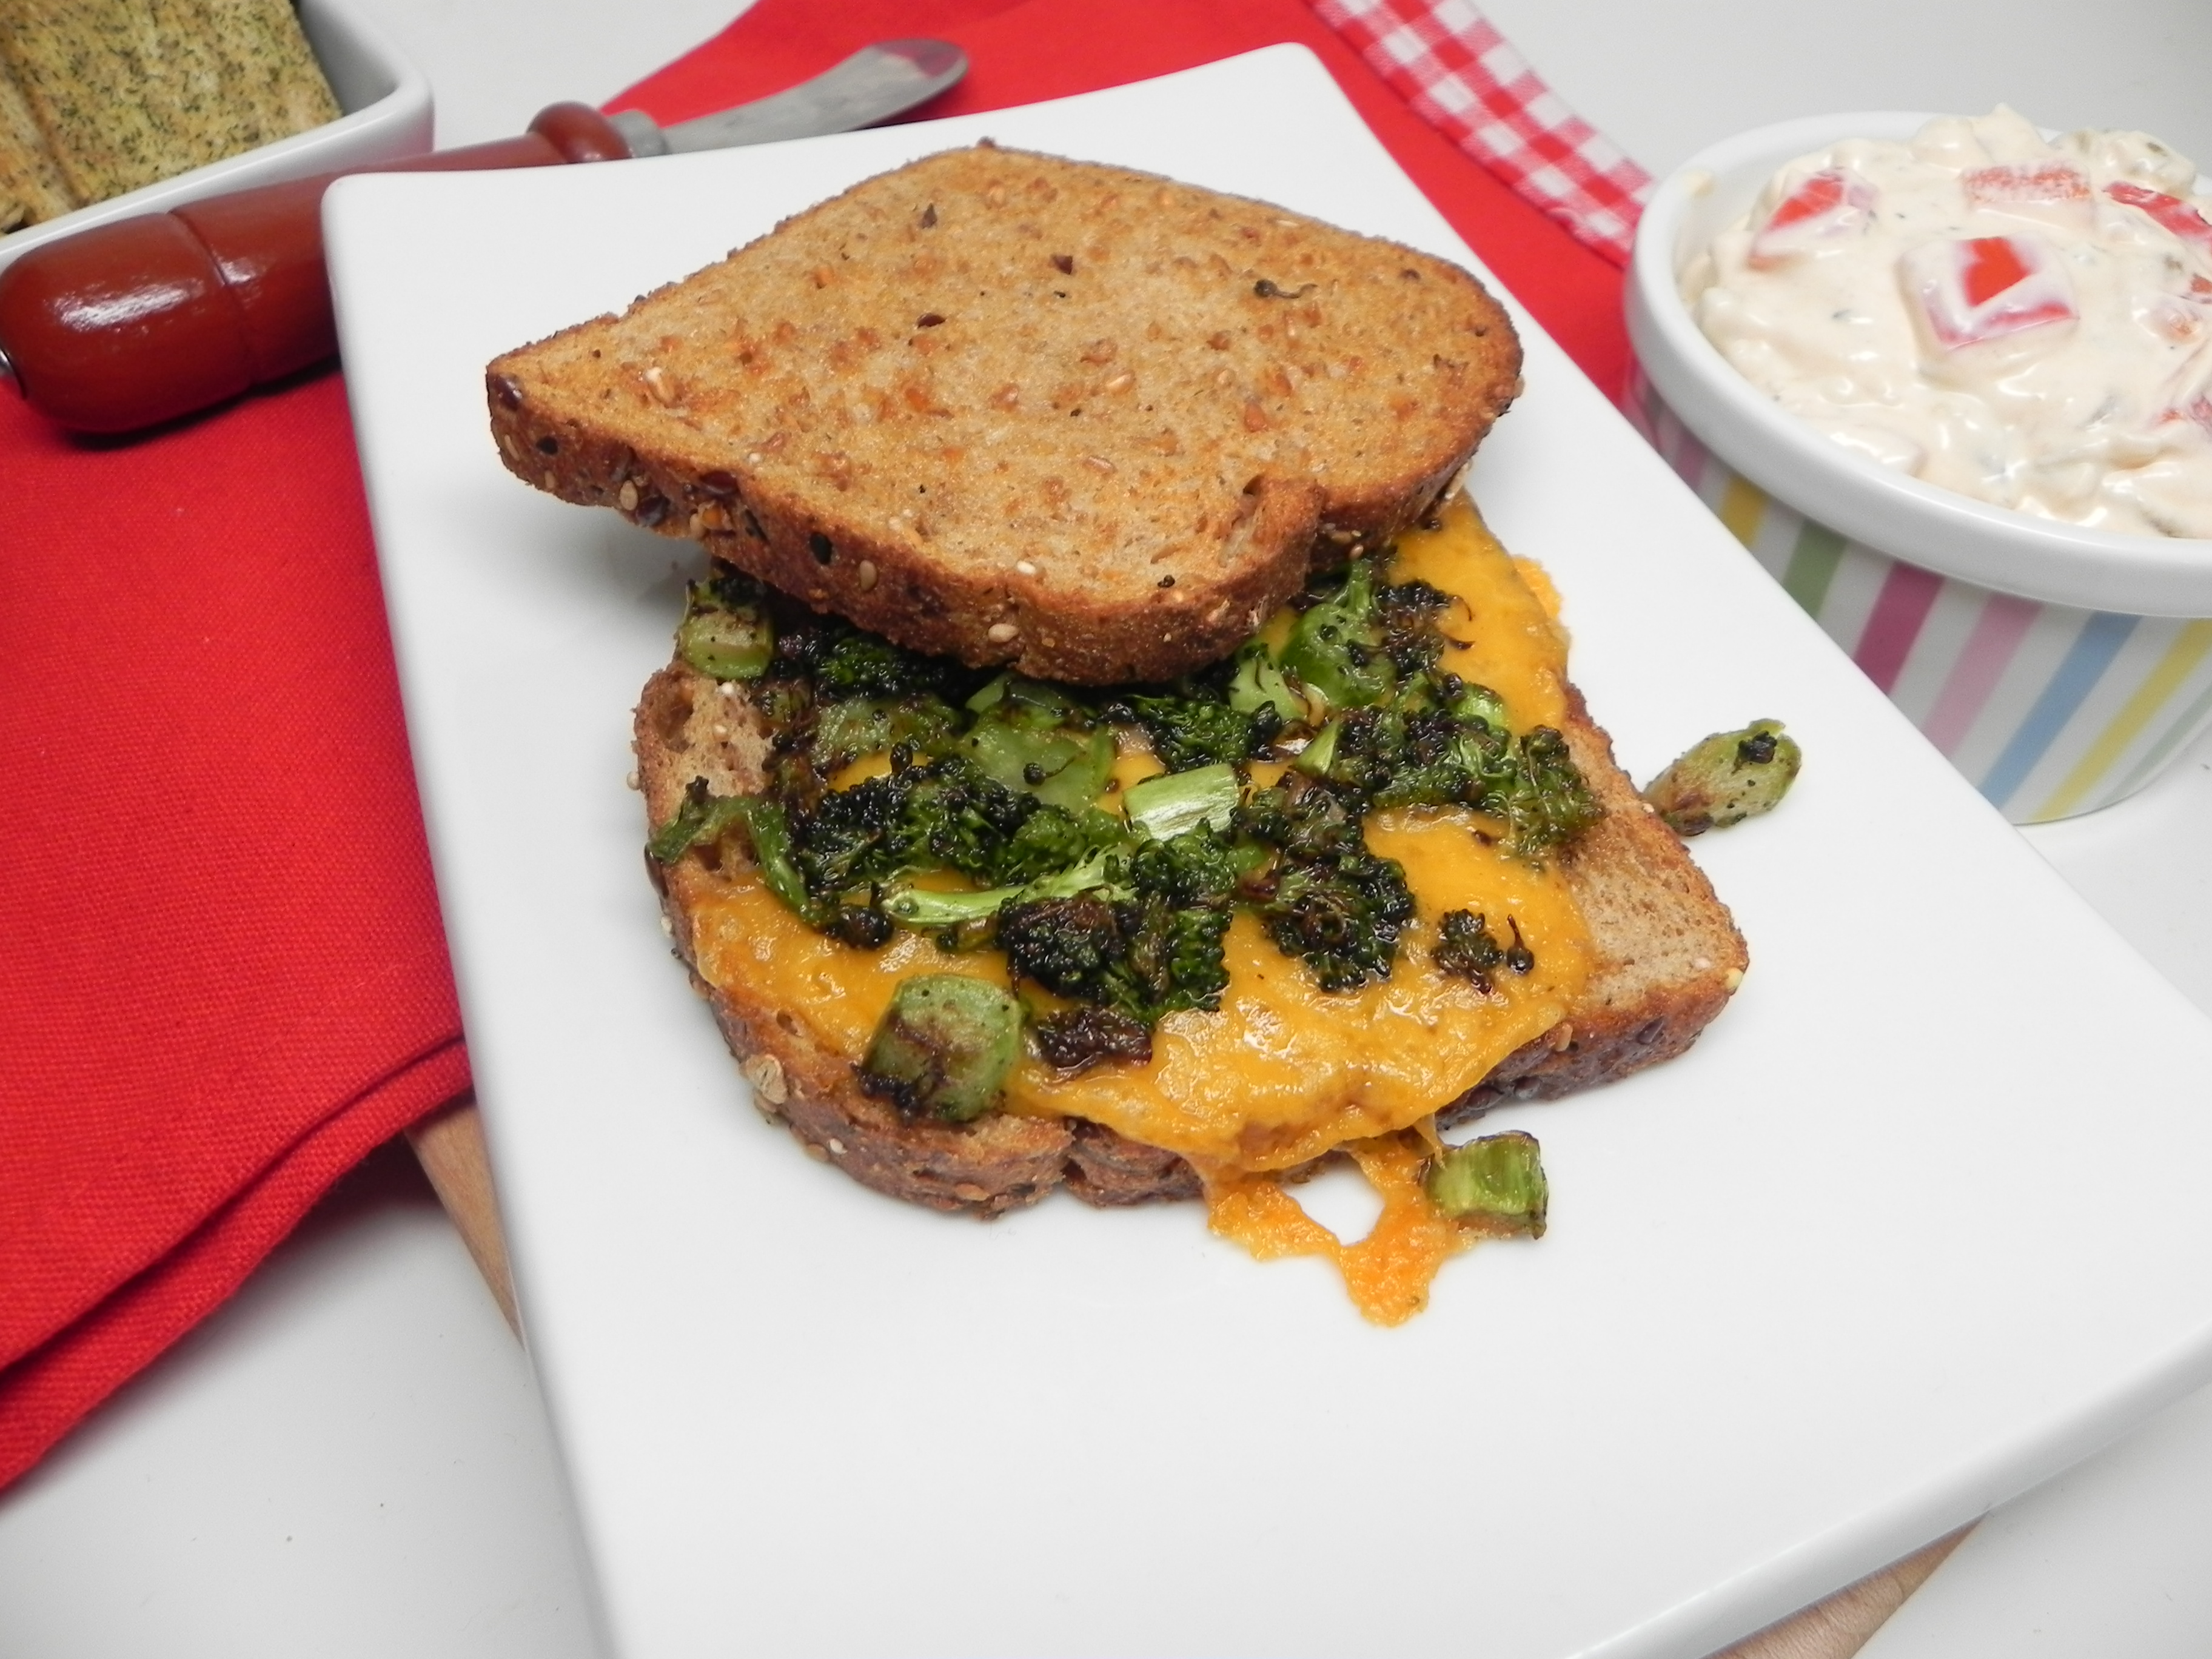 Grilled Broccoli and Cheese Sandwich